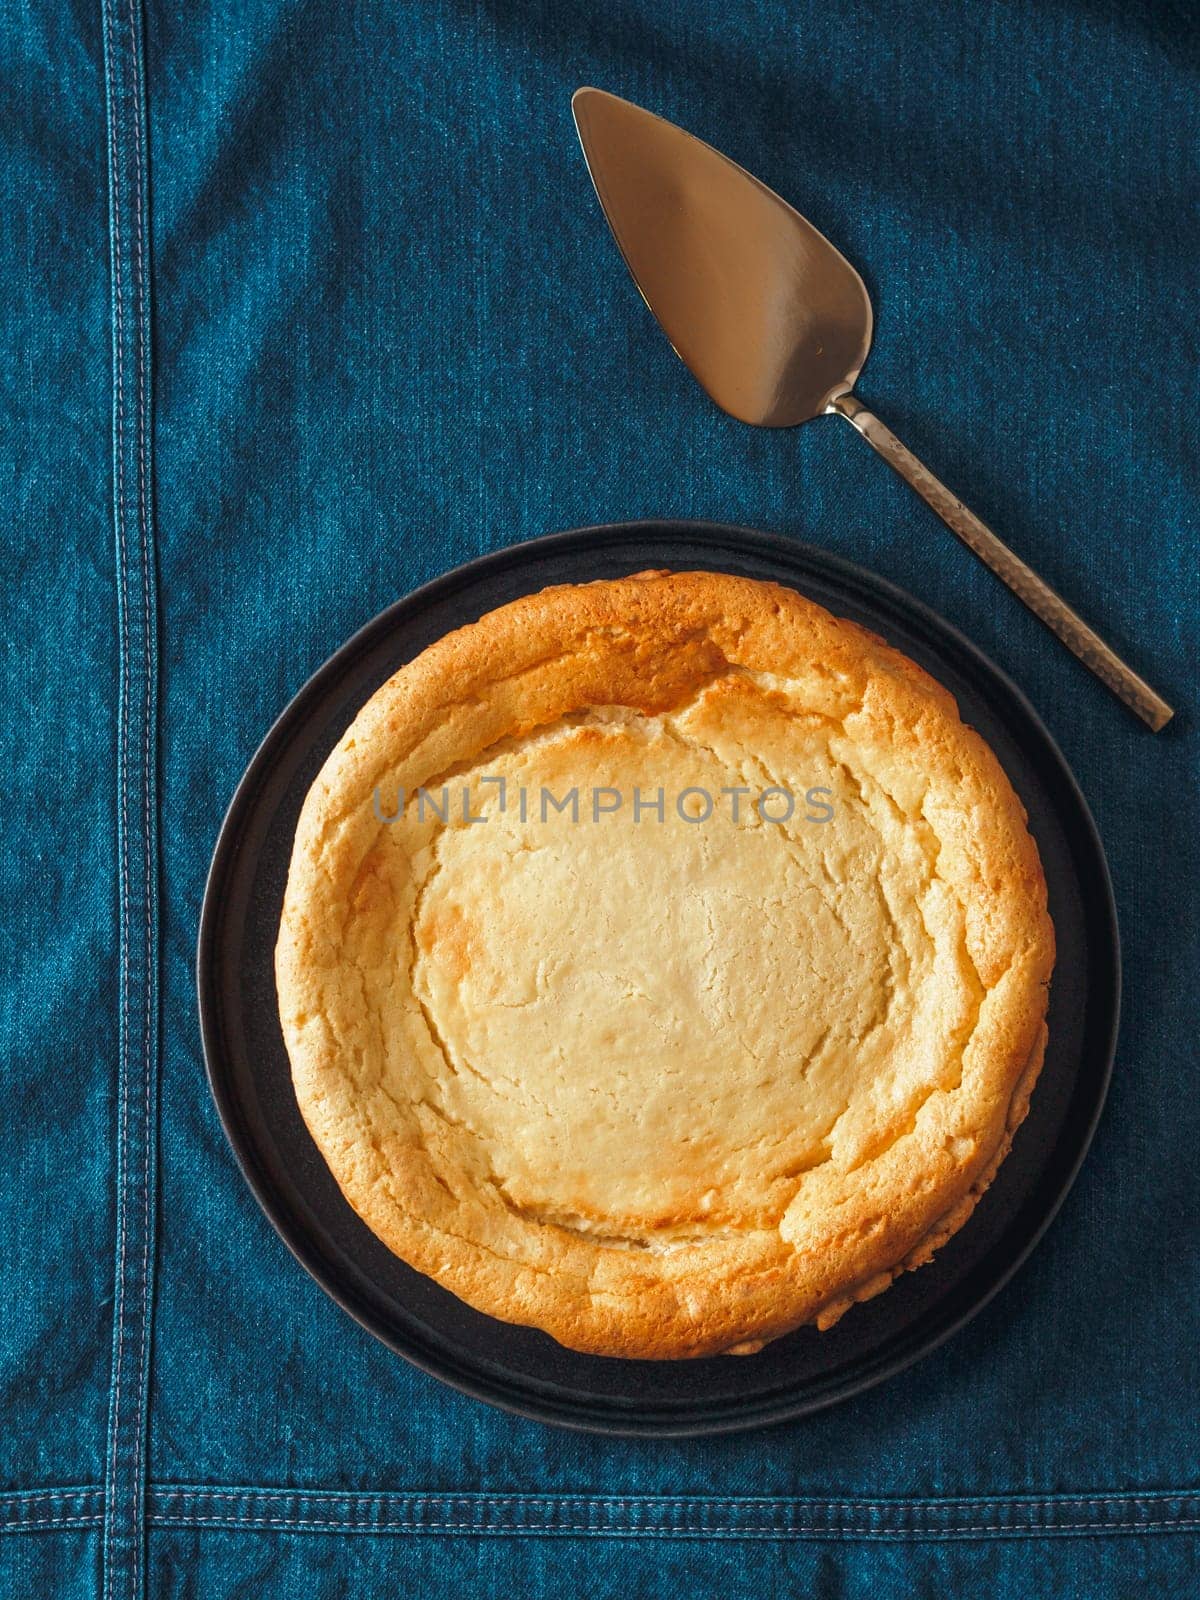 Plate with whole cheesecake pie on table with jeans tablecloth. Classic cheesecake flat lay or top view. Vertical.